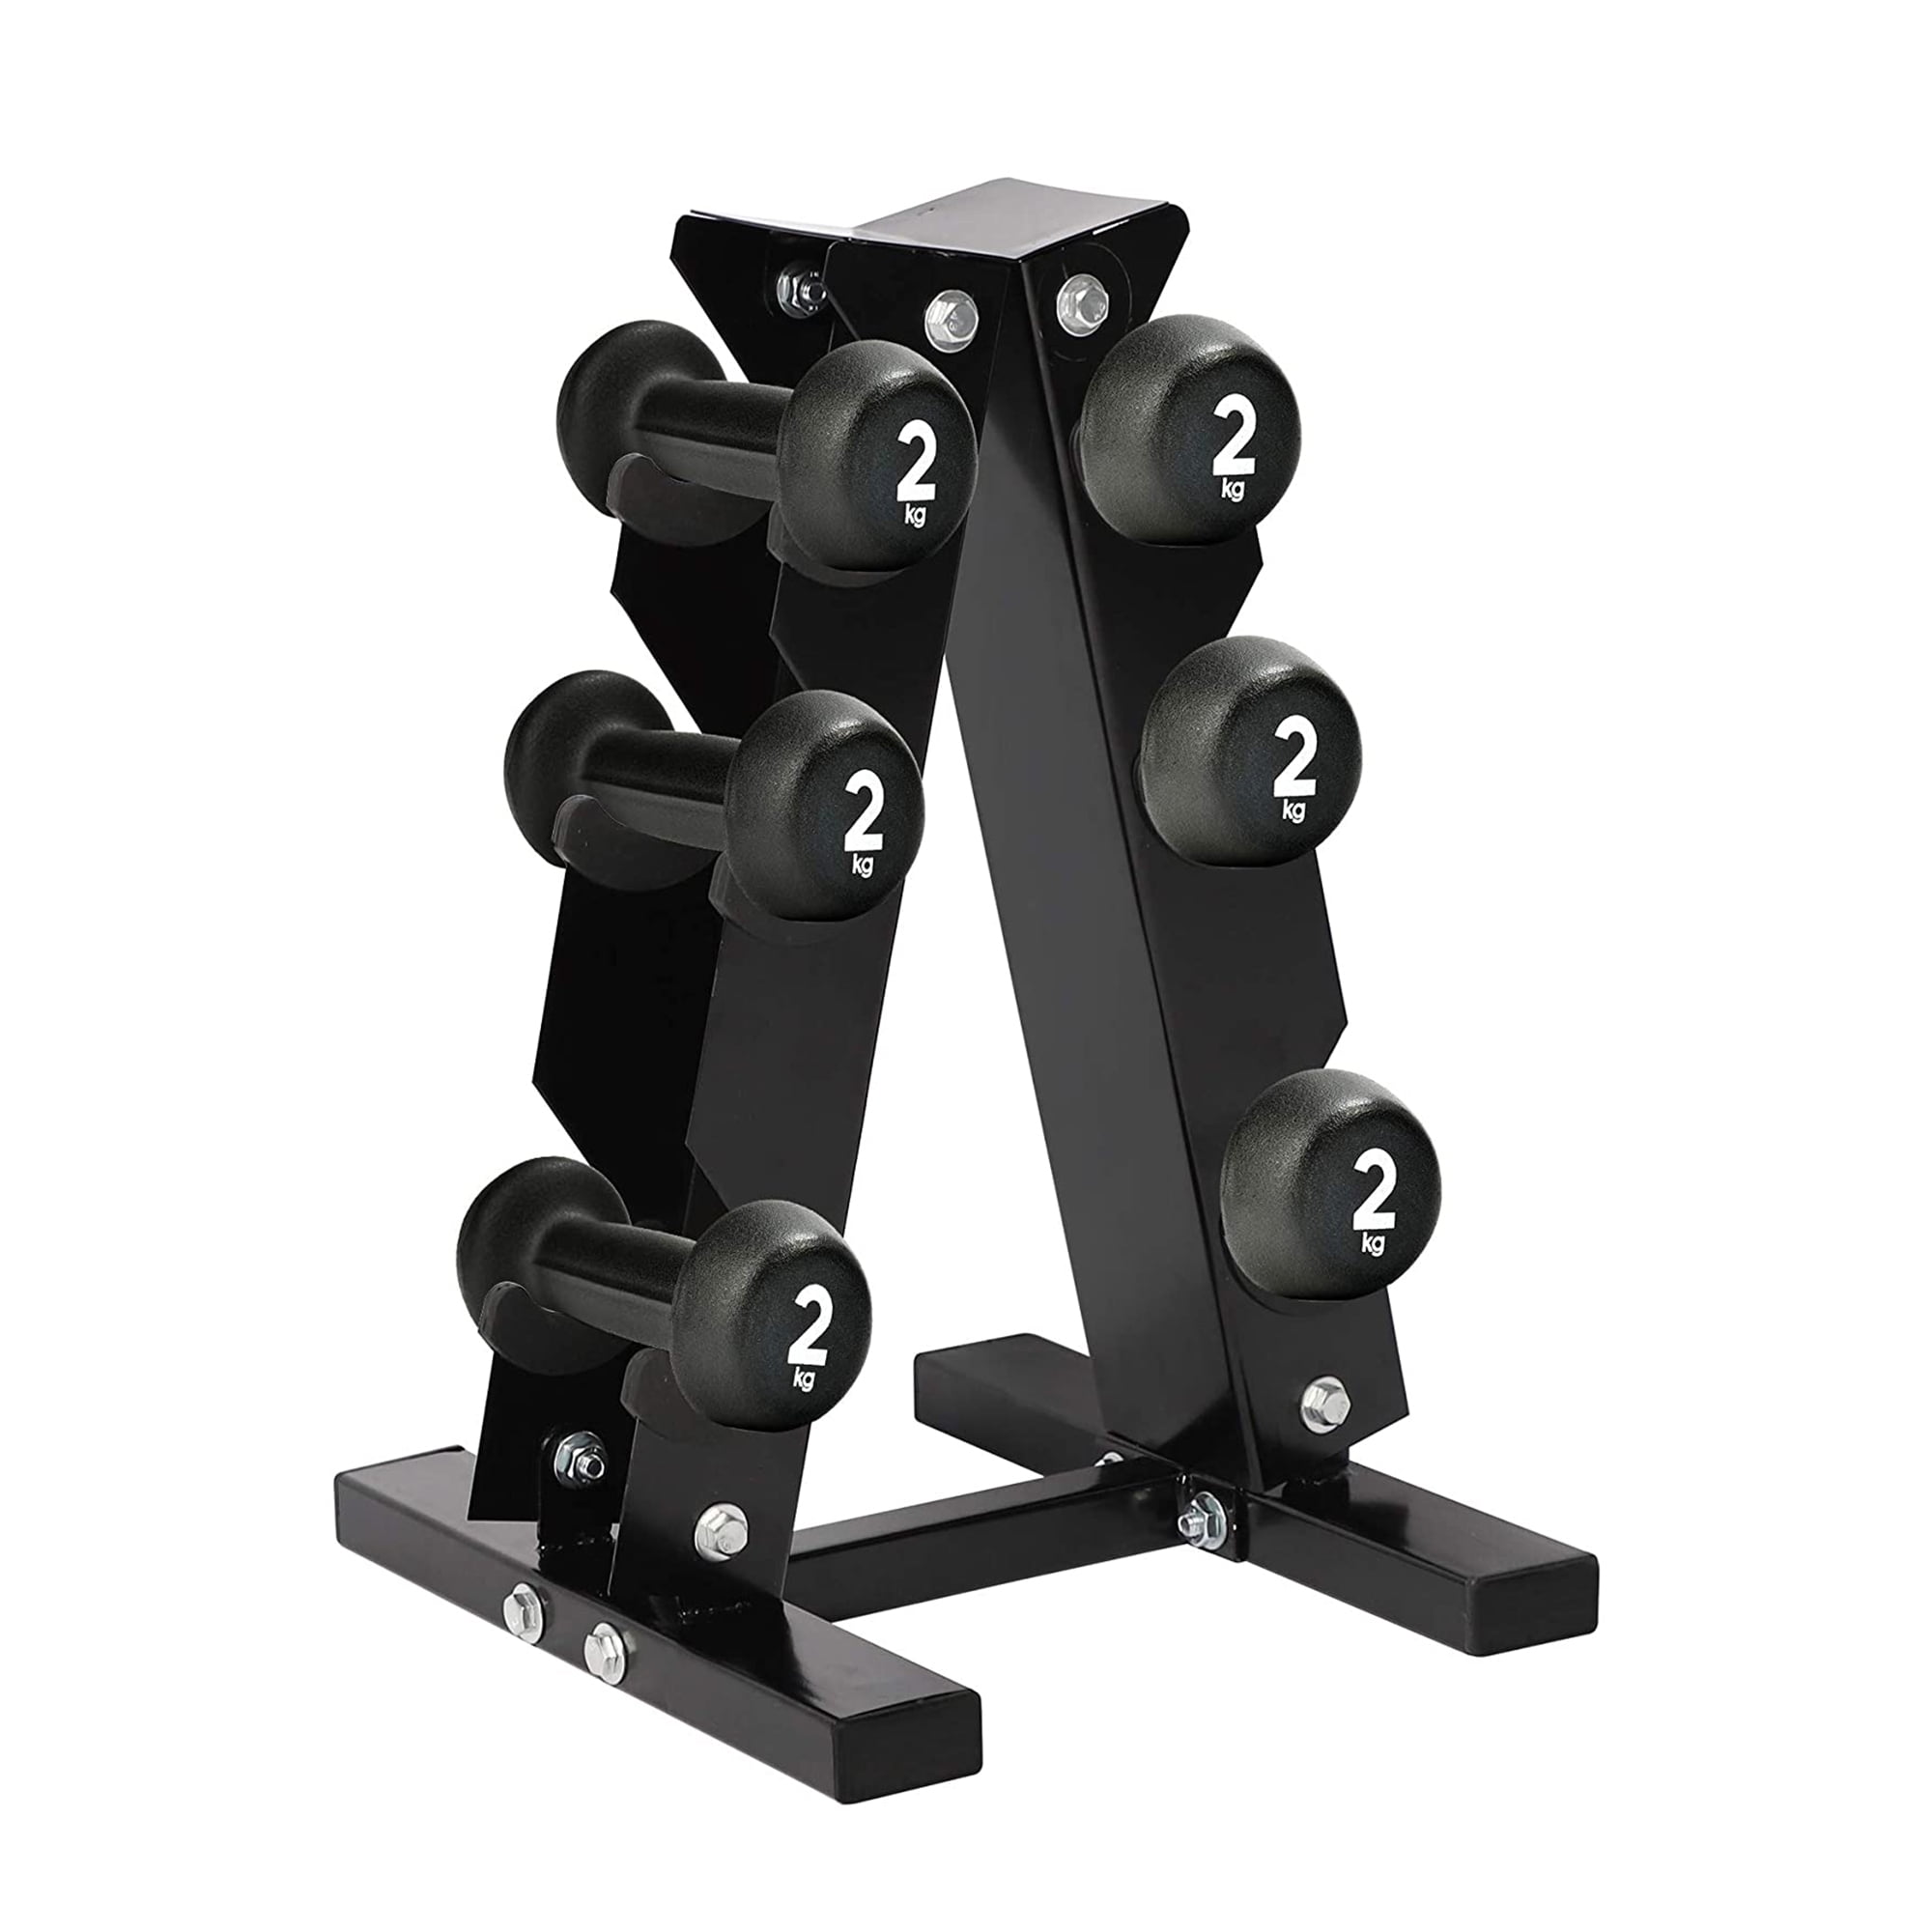 Tree Shape Dumbbell Rack Compact Dumbbell Bracket Household Weights Organizer Stand Home Workout Dumbbell Rack for Home Gym Black 3 Tier Dumbbell Rack 